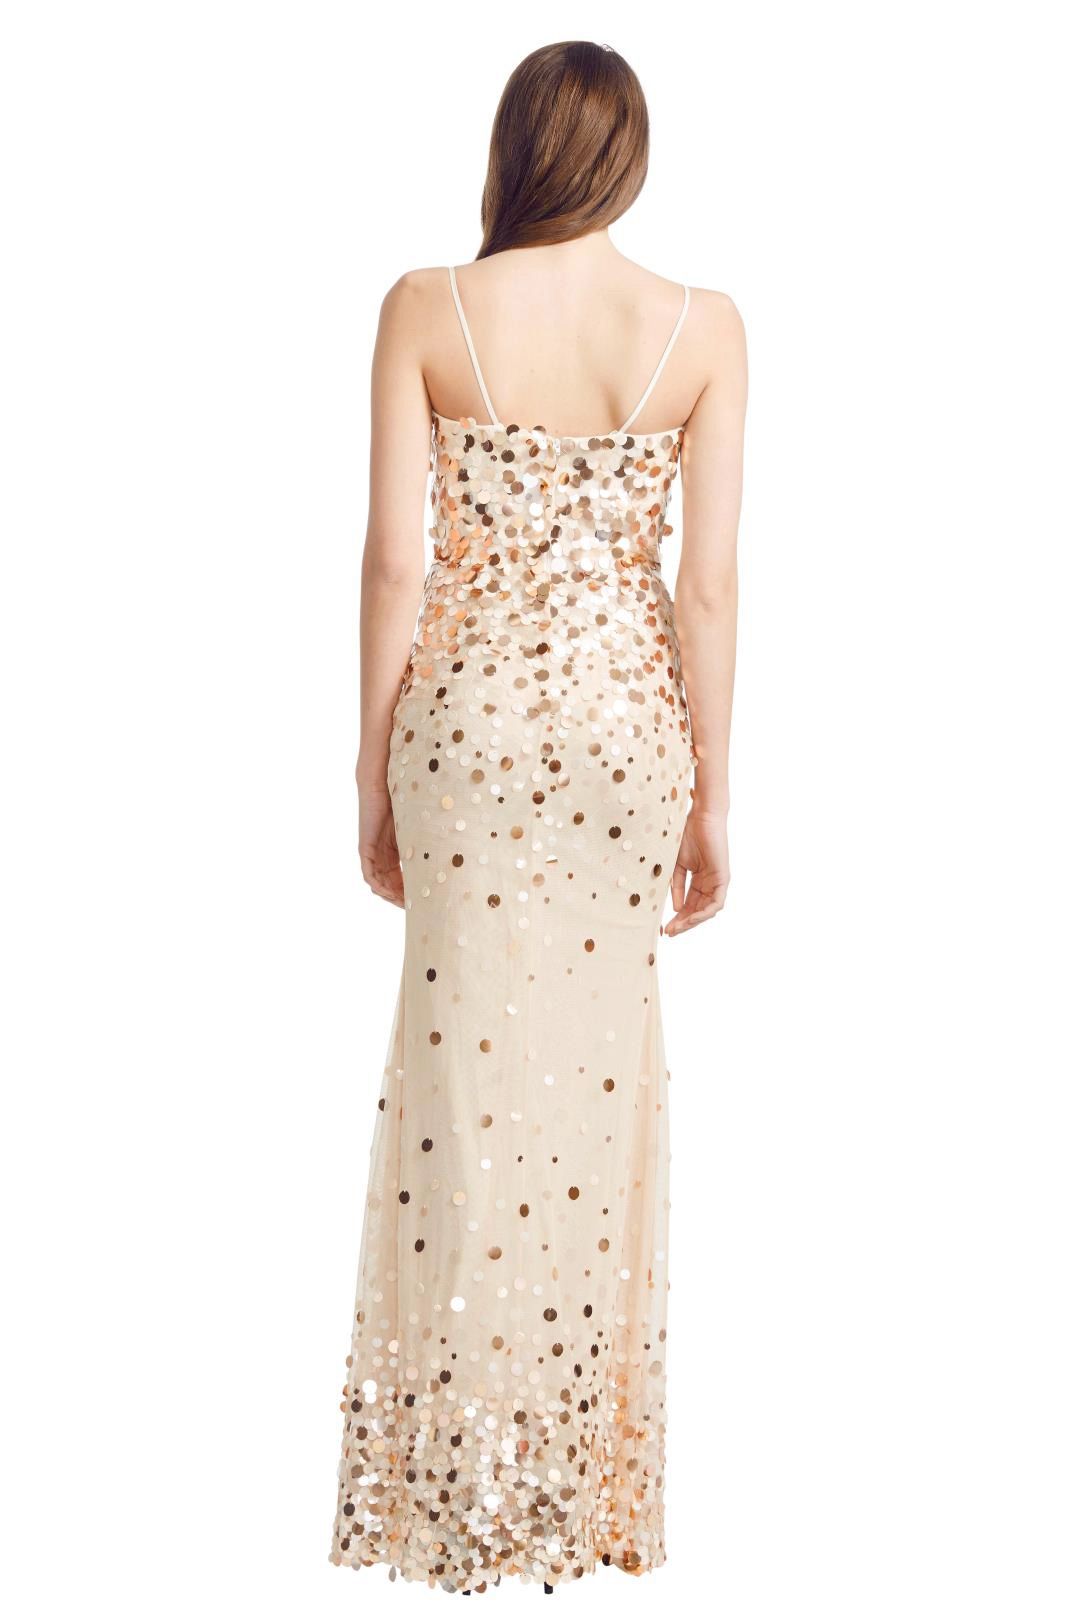 Alex Perry - Flurina Gown - Gold - Back